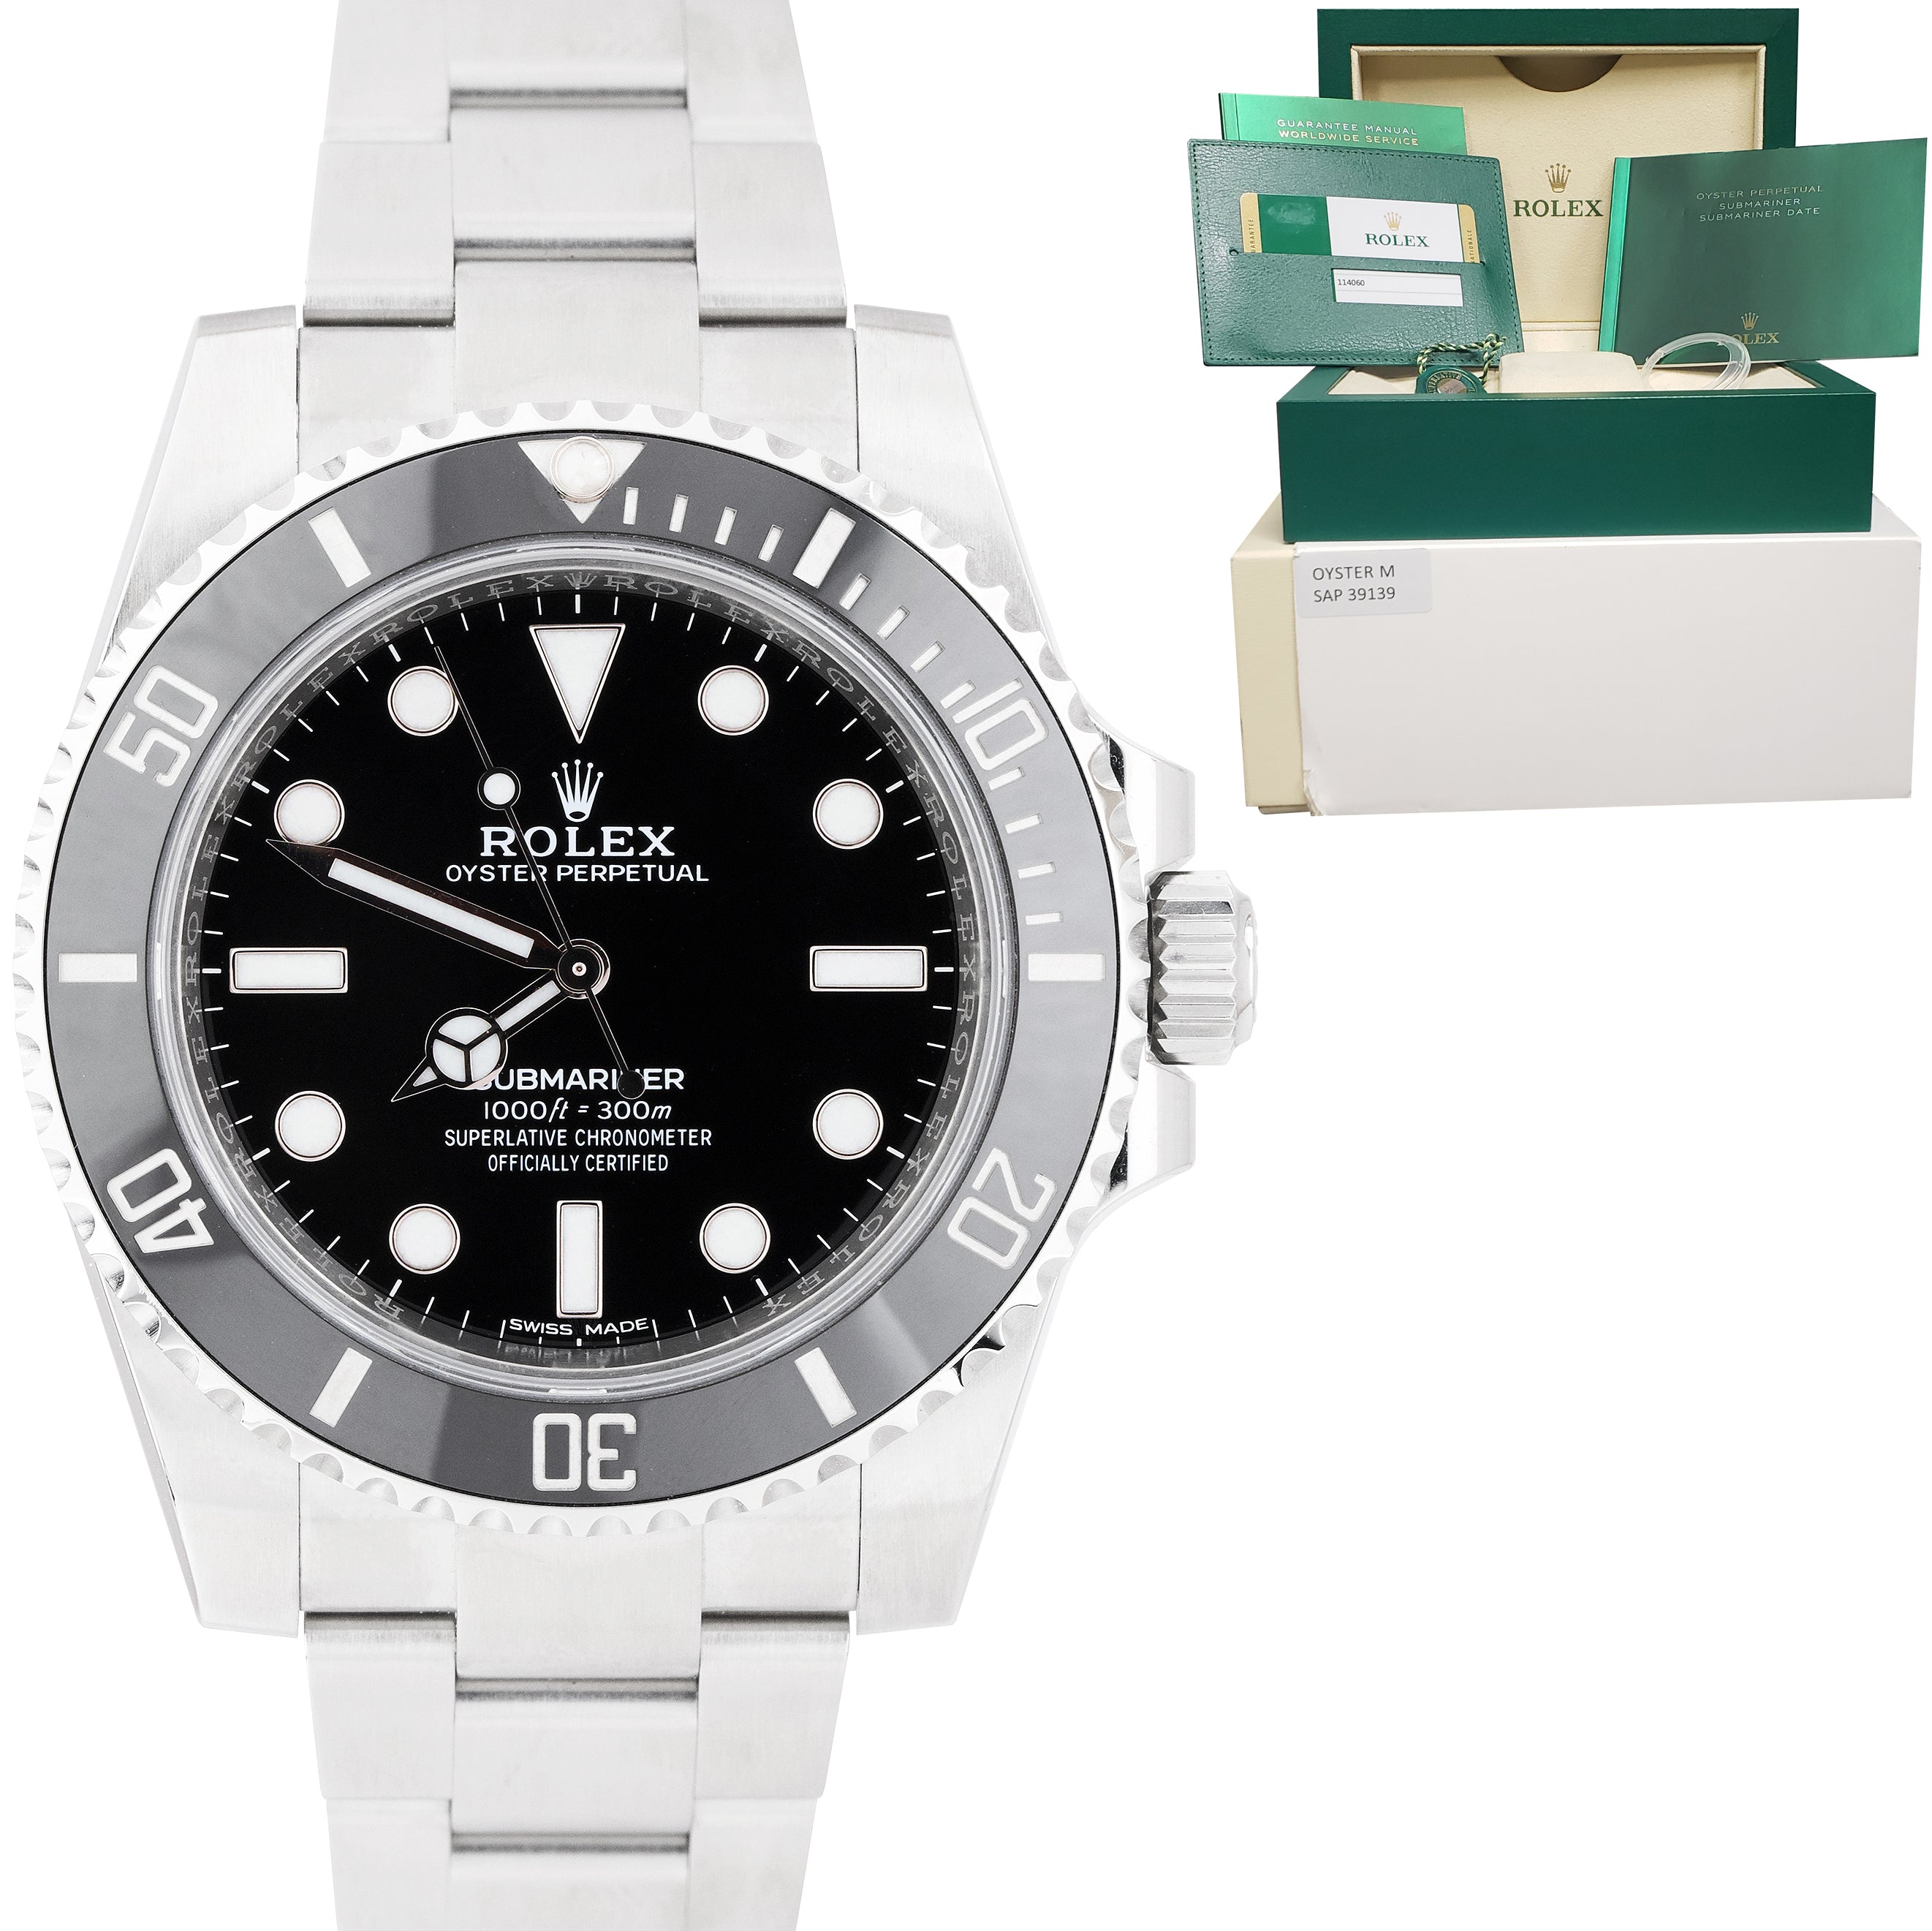 MAY 2019 UNPOLISHED Rolex Submariner No-Date Stainless Steel 40mm Watch 114060